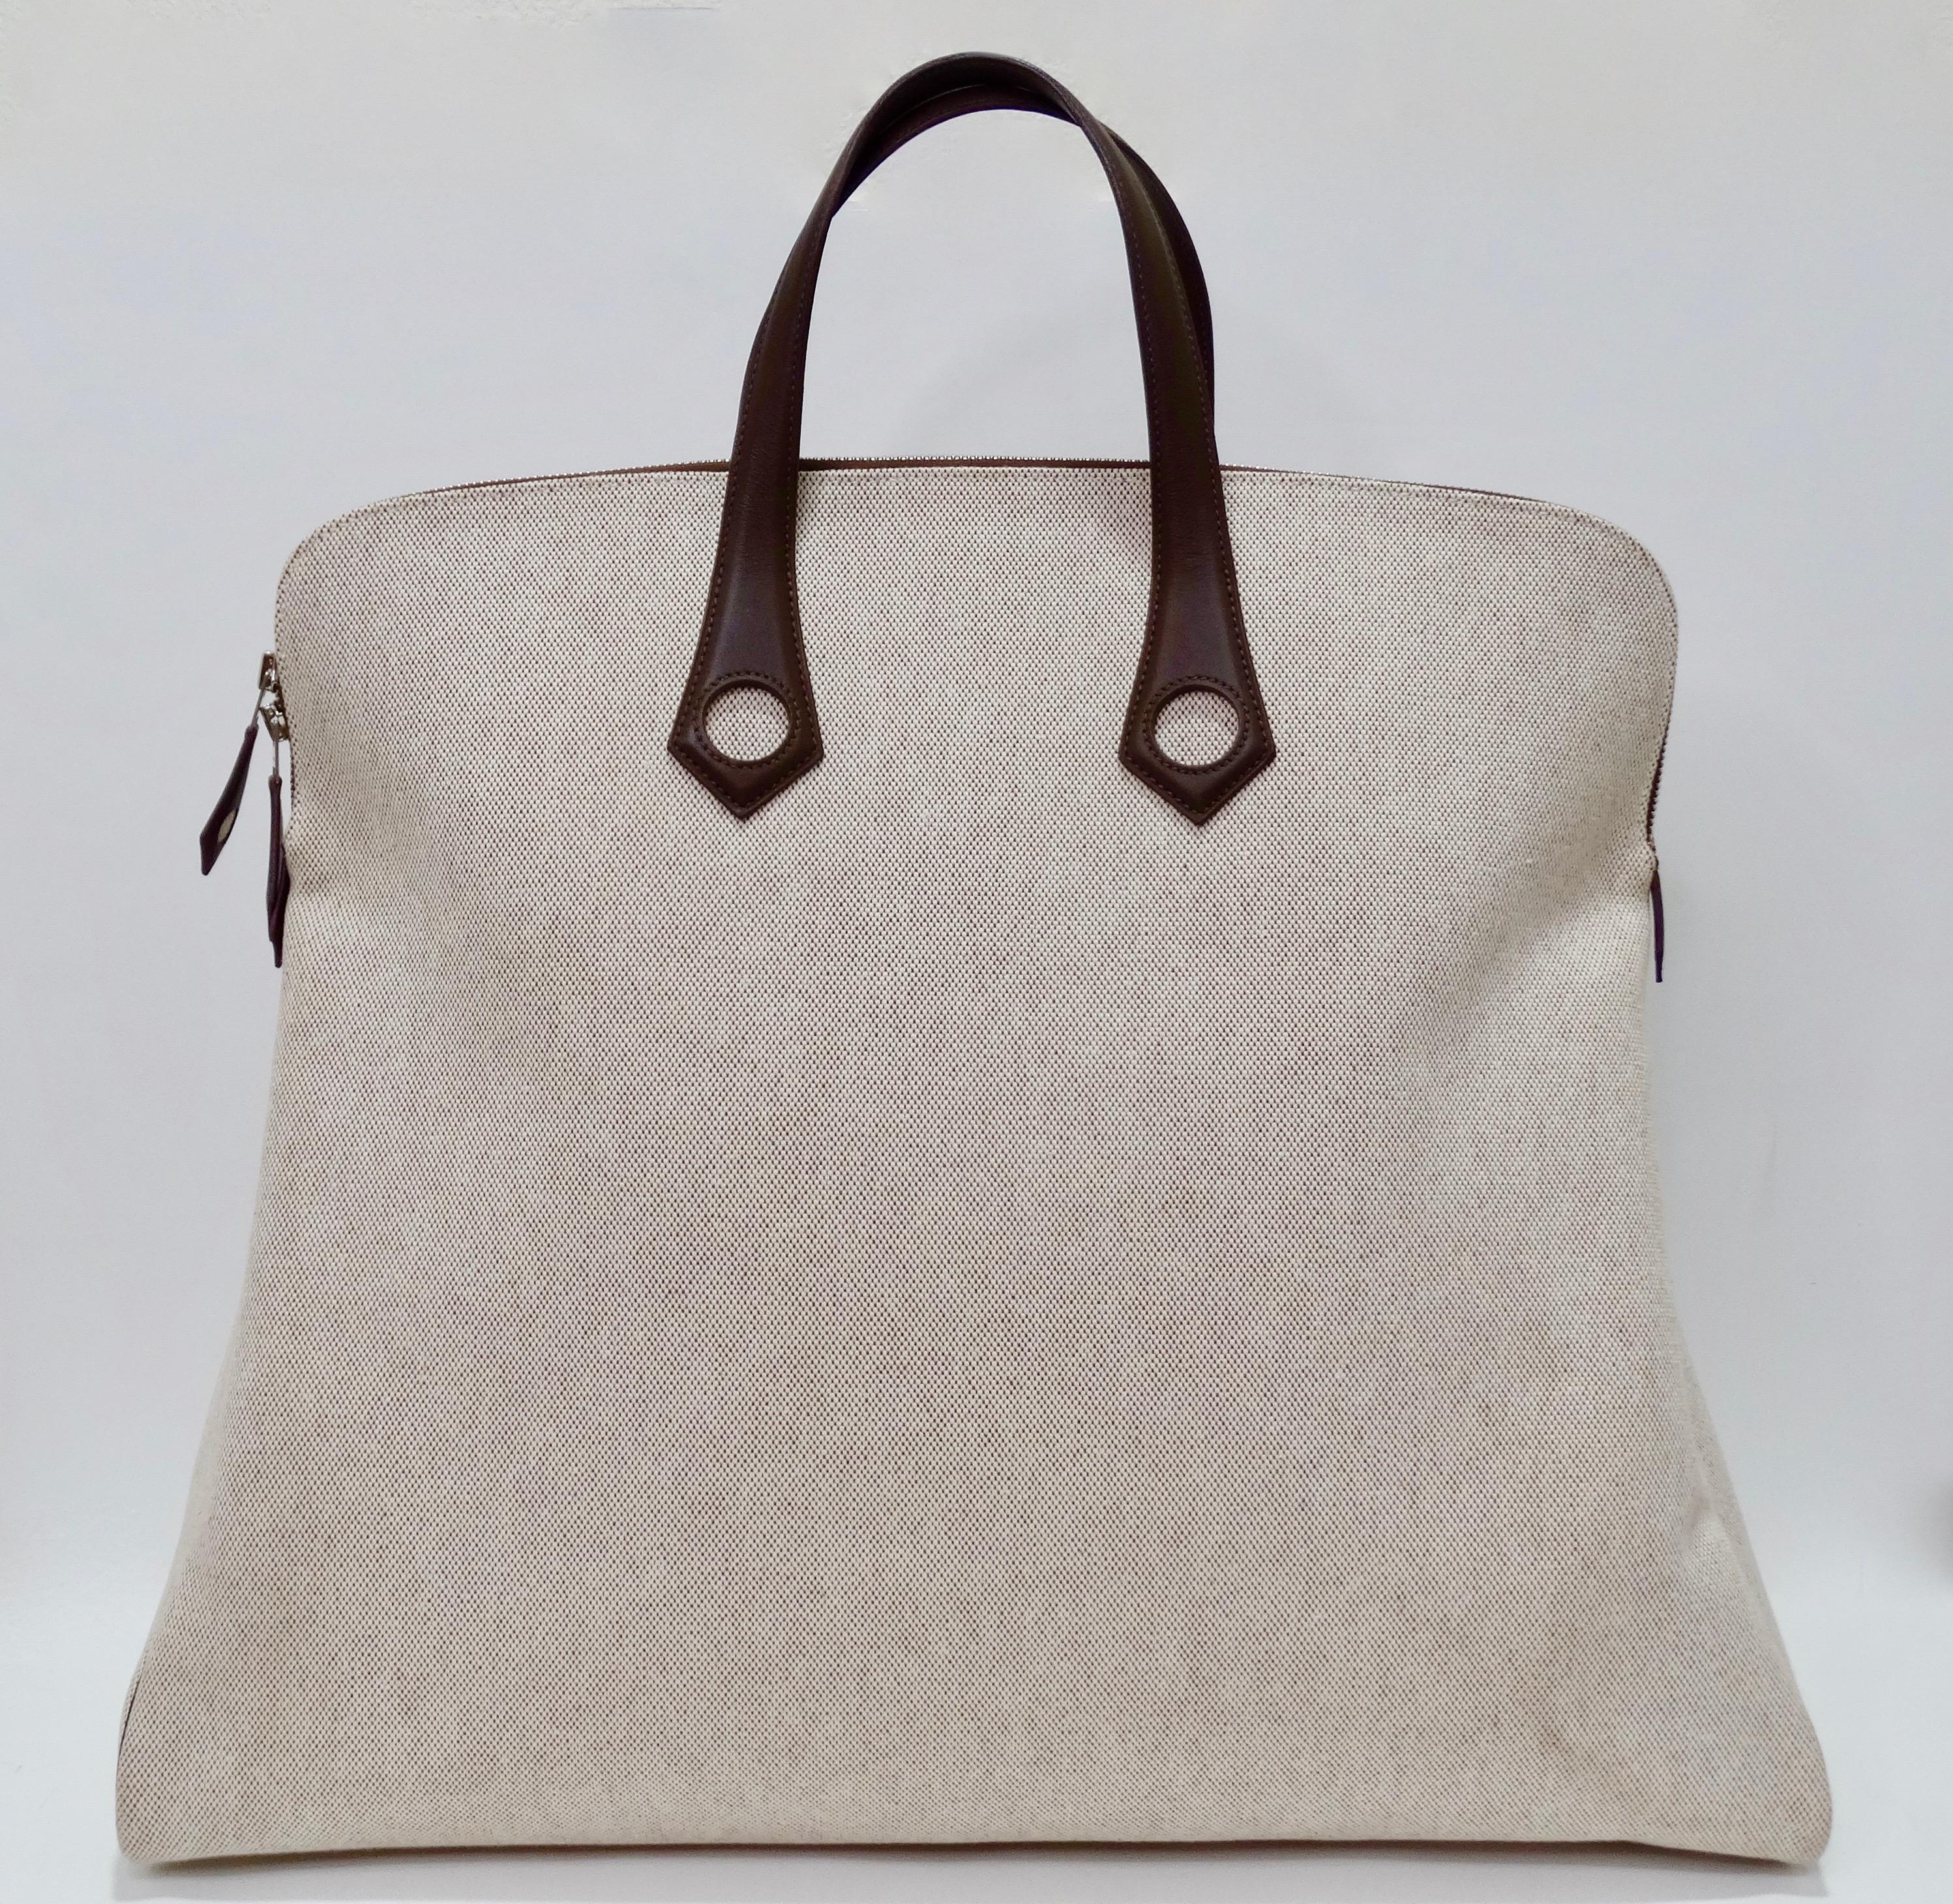 Hermés 2006 Large Tan Canvas Travel Tote  In Excellent Condition For Sale In Scottsdale, AZ